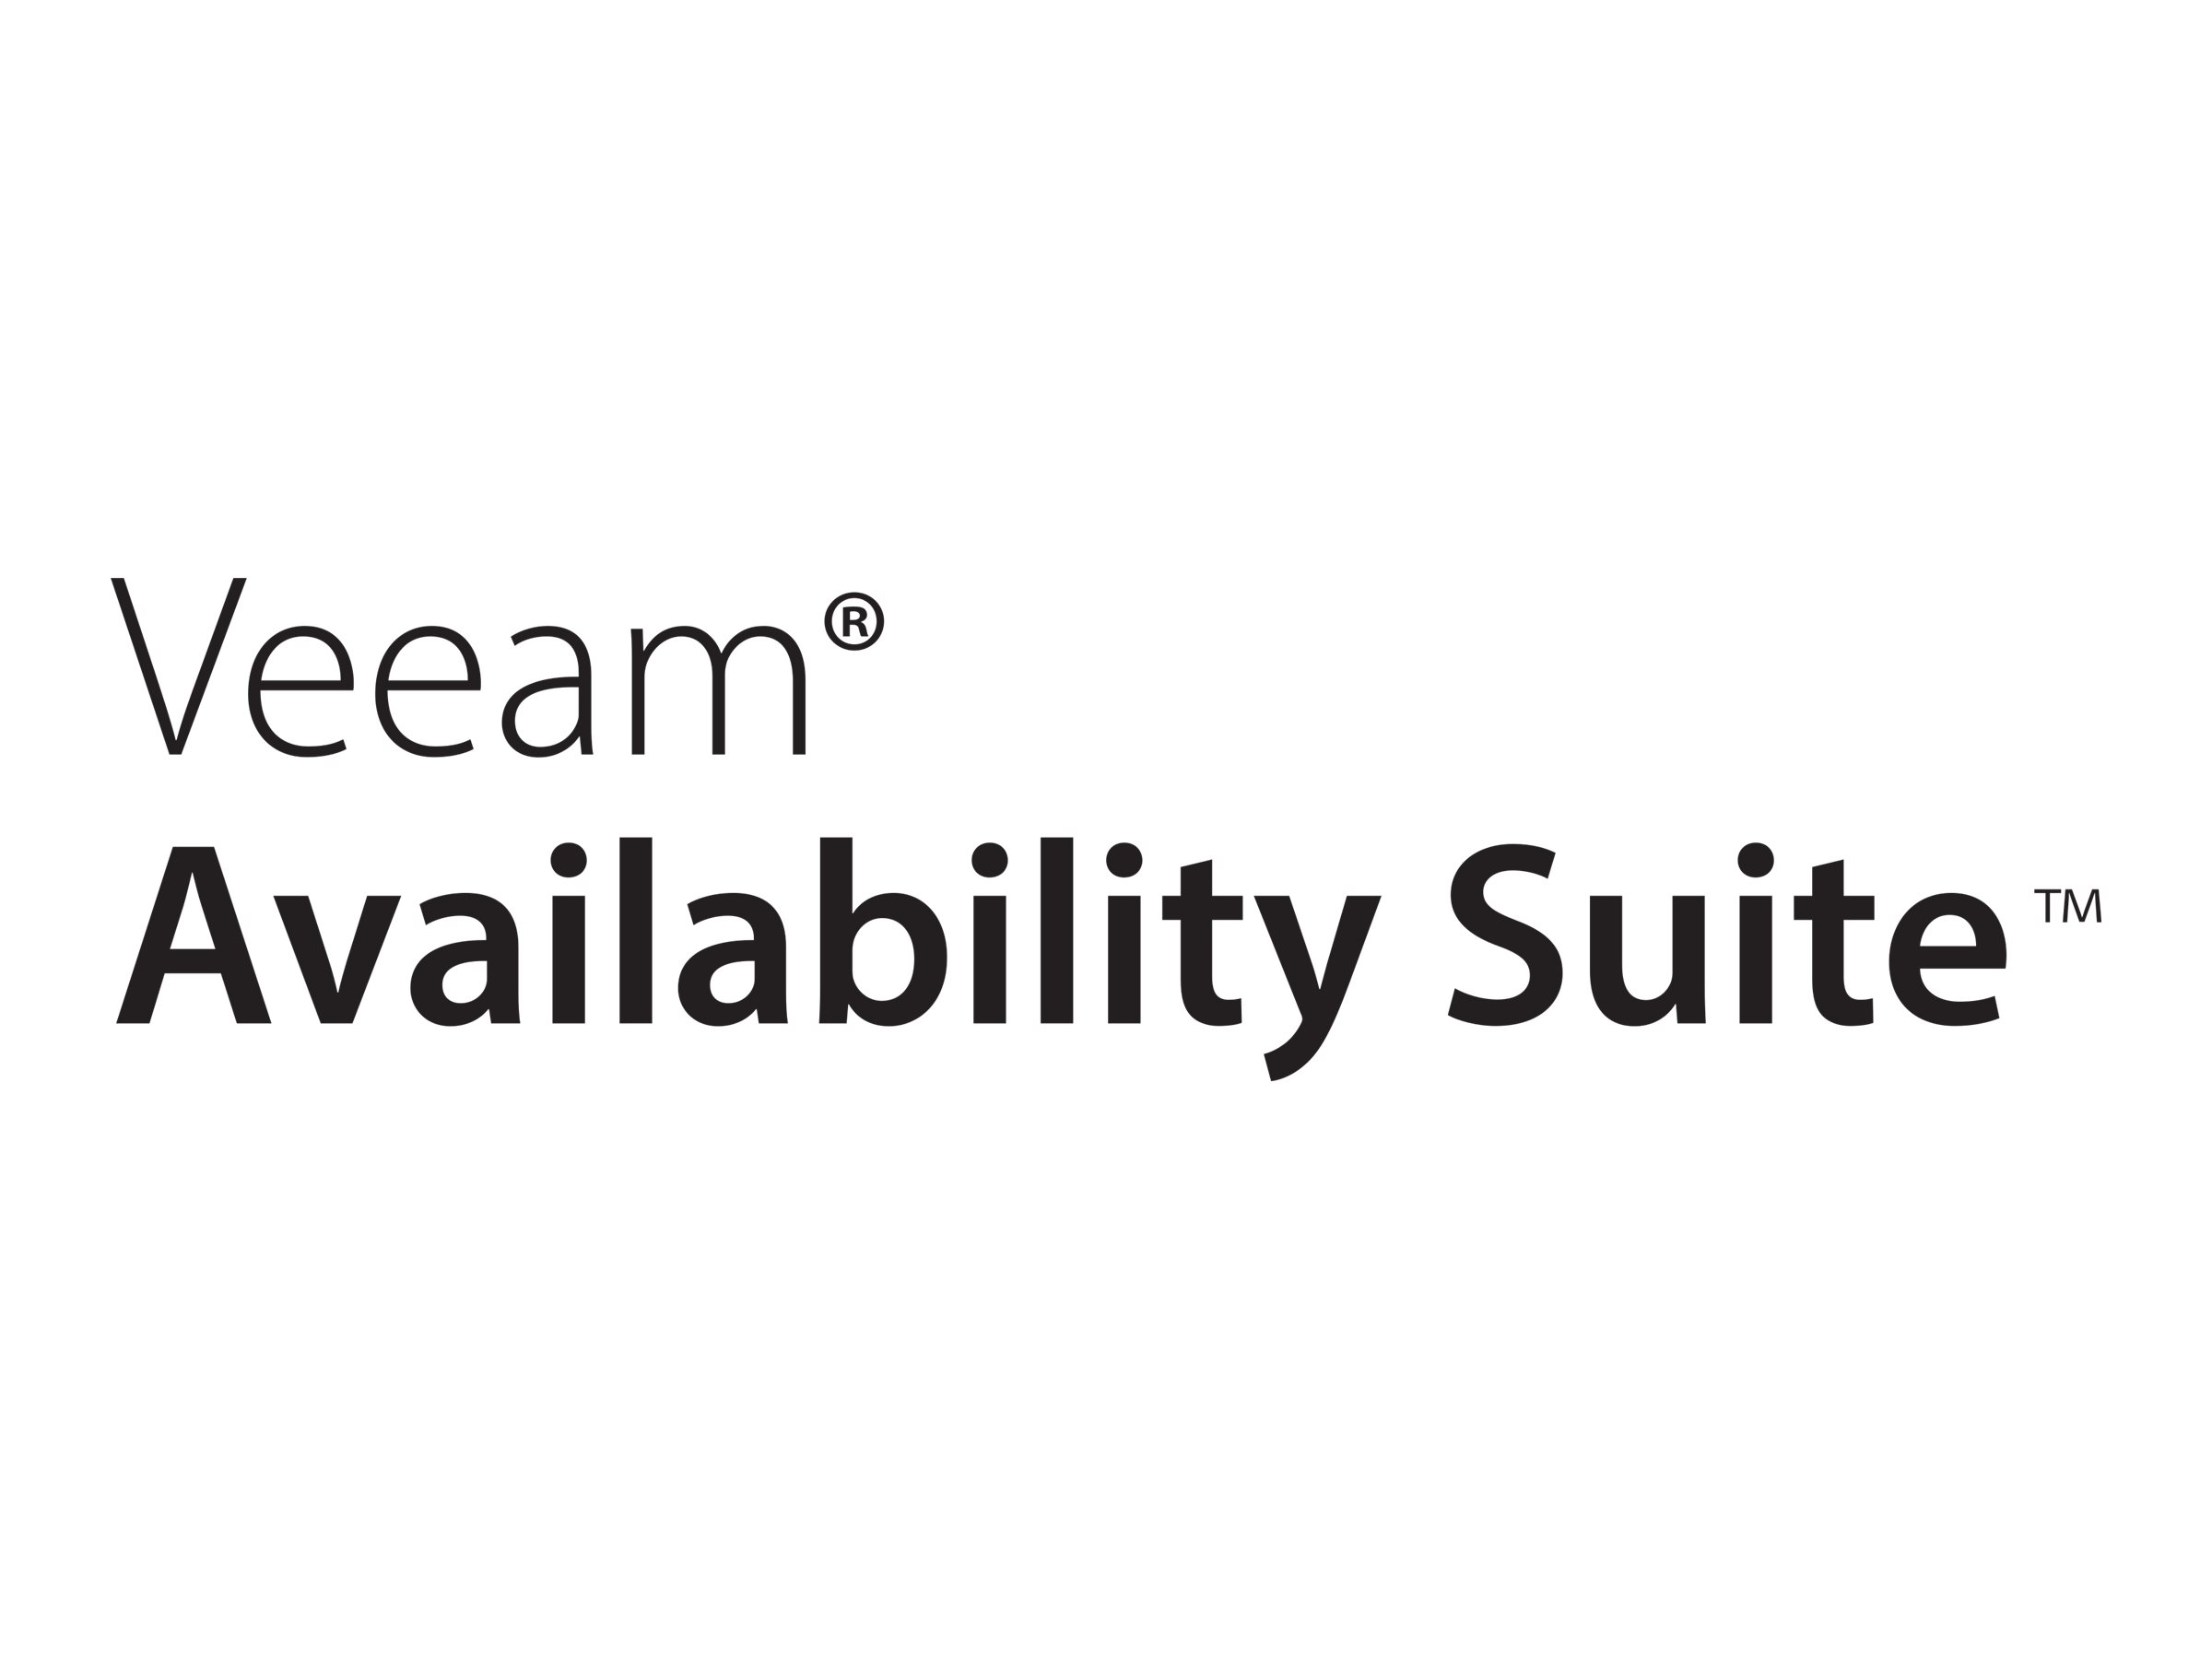 2 years of Prepaid Migration of VCSP perpetual licenses to VCSP rental - Veeam Availability Suite Enterprise Plus - Includes 24/7 support. Cloud & Service Providers Only (10 VMs).